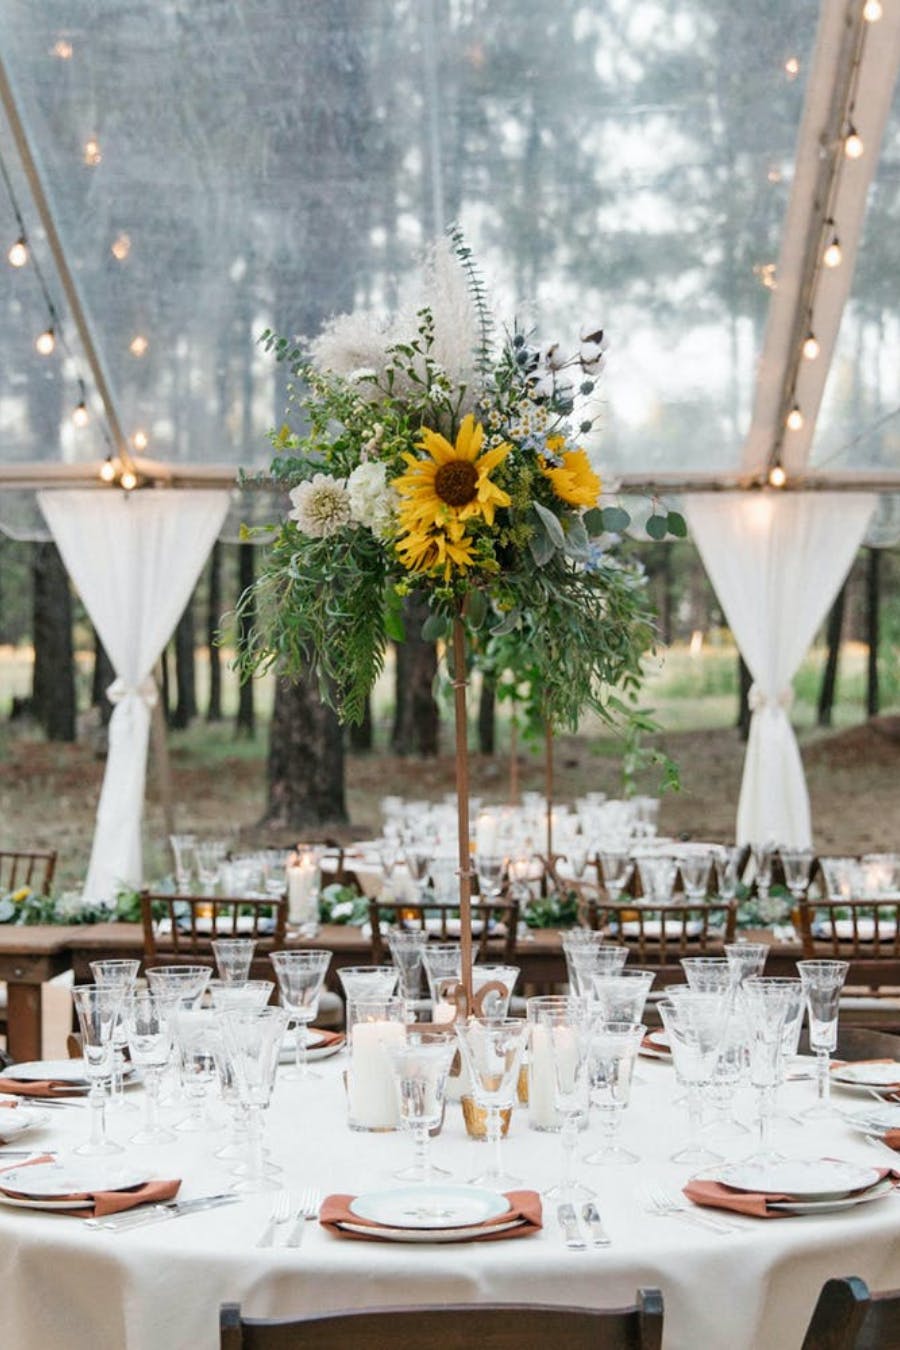 Outdoor tented wedding with Sunflower wedding centerpiece planned by Sally Arnold Events